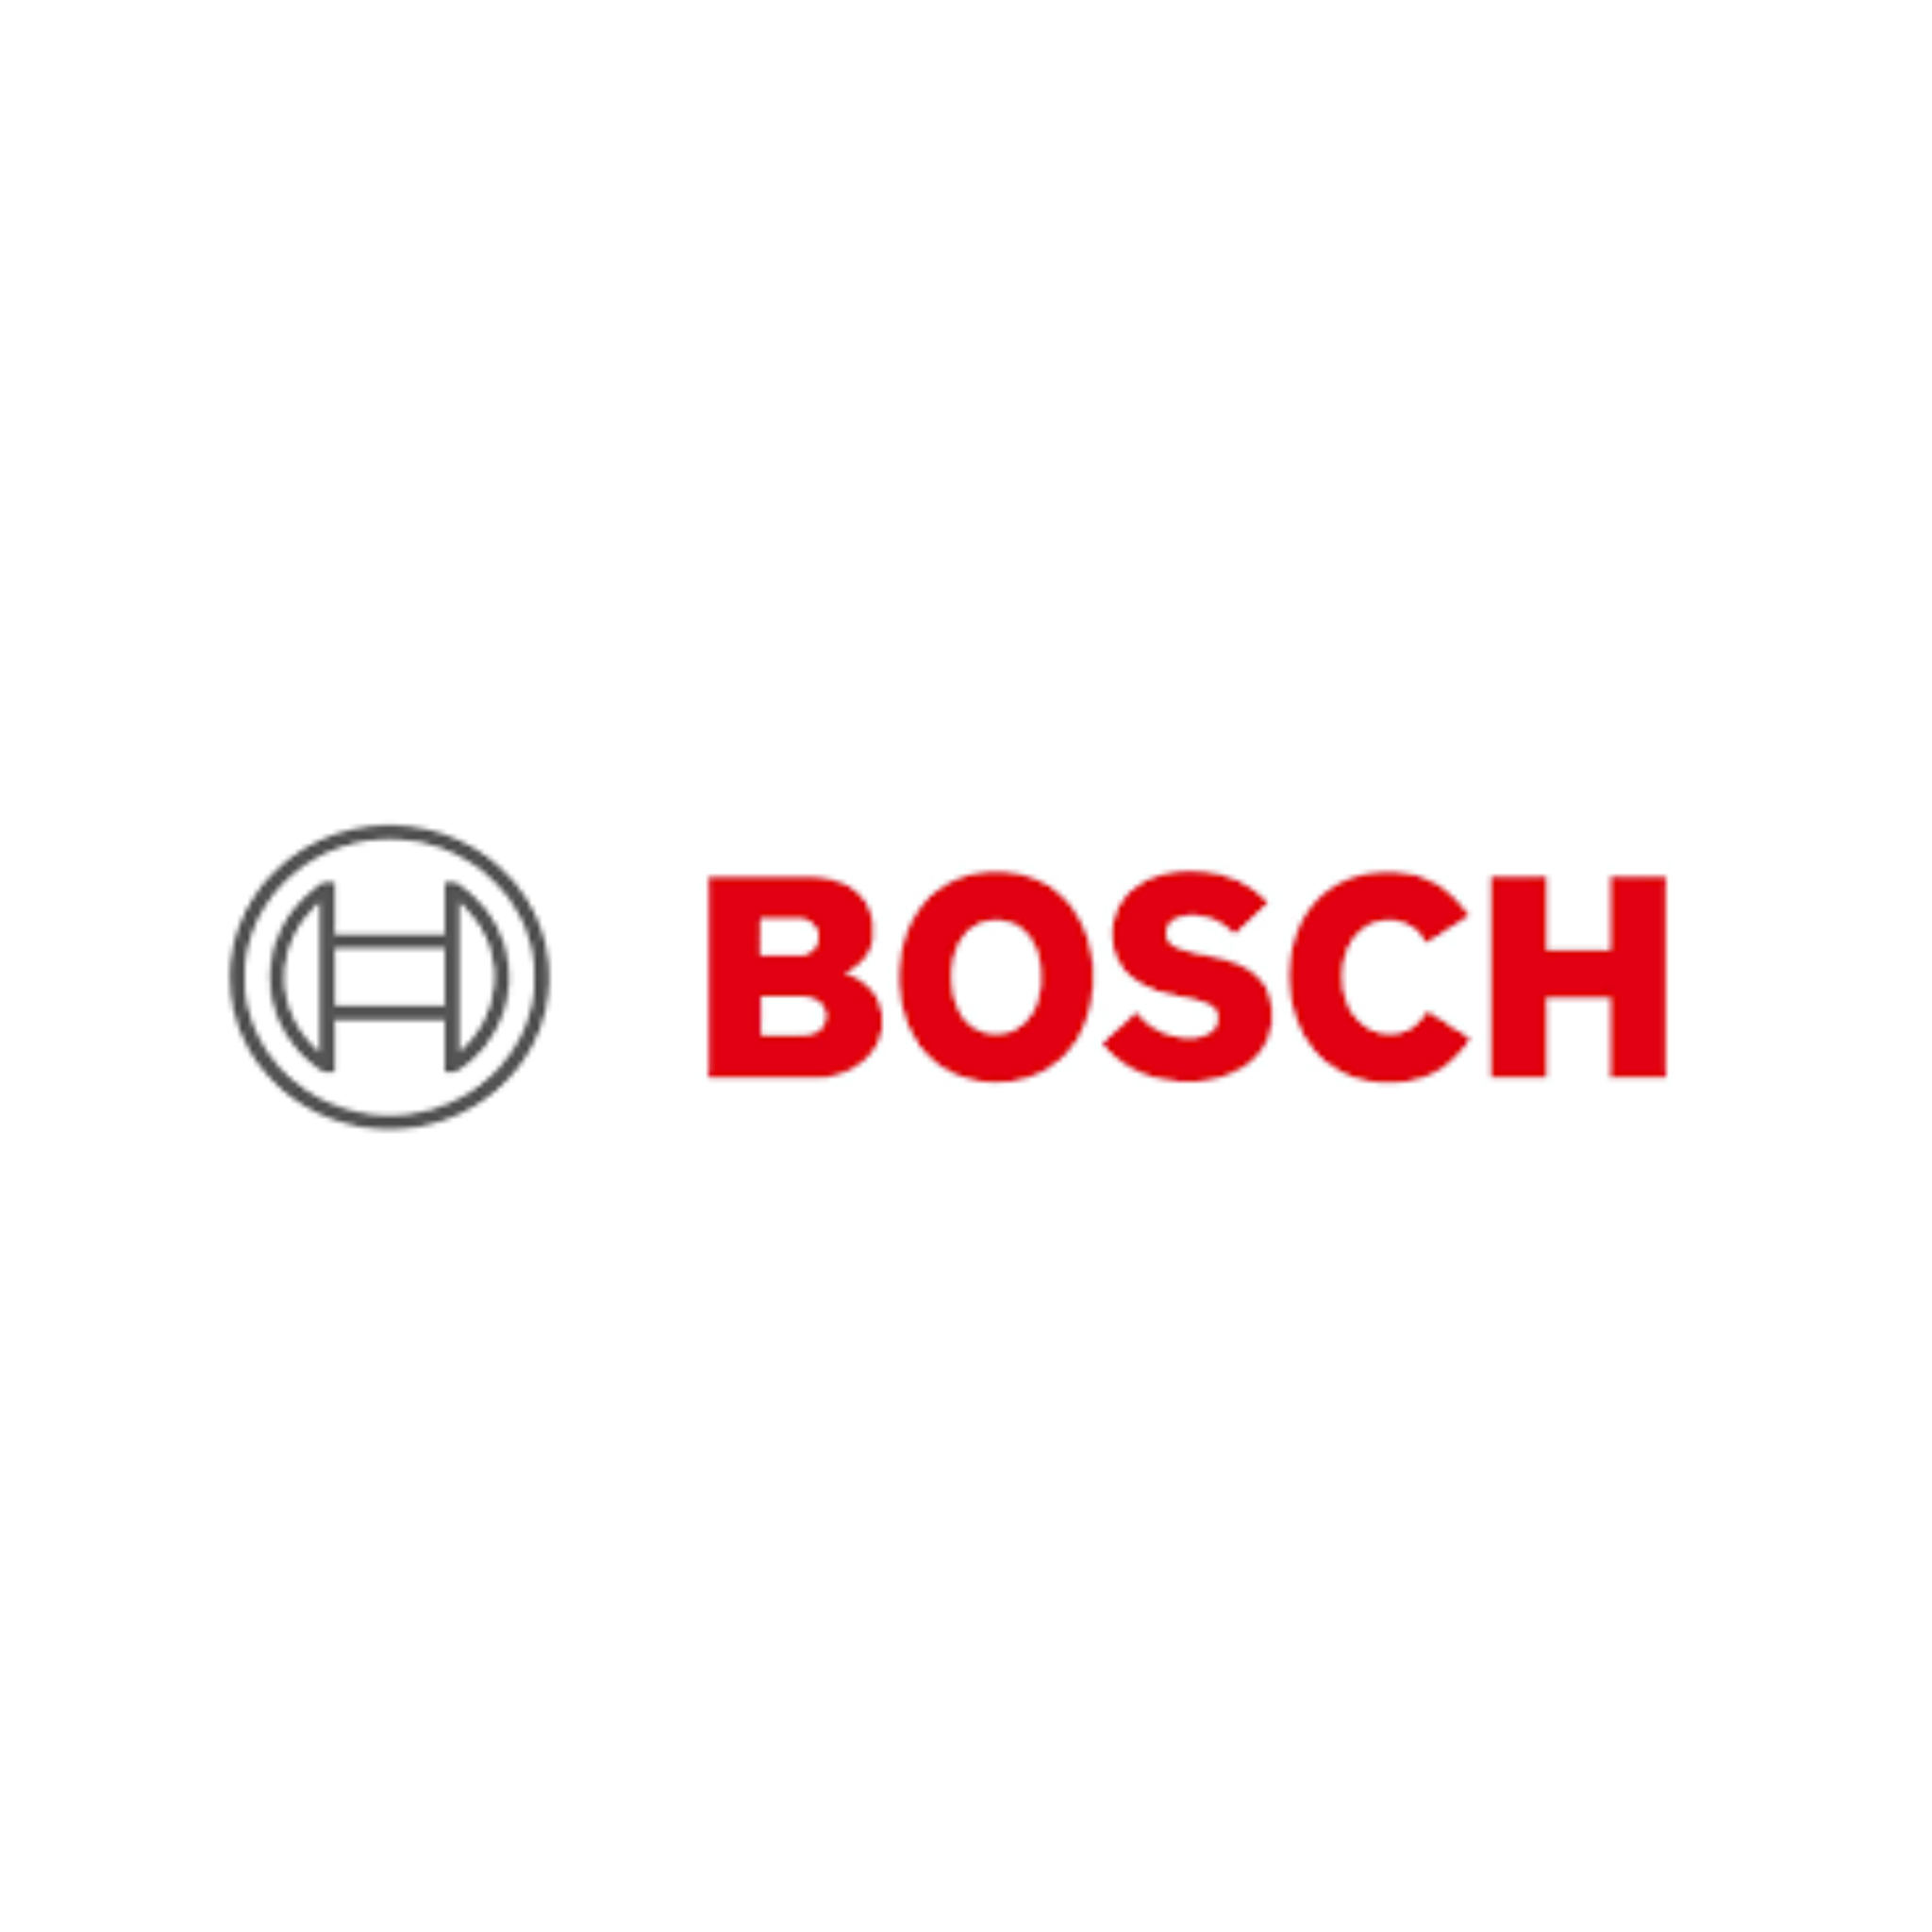 By 2025, Bosch plans to lay off 1,500 positions at two German locations.-thumnail